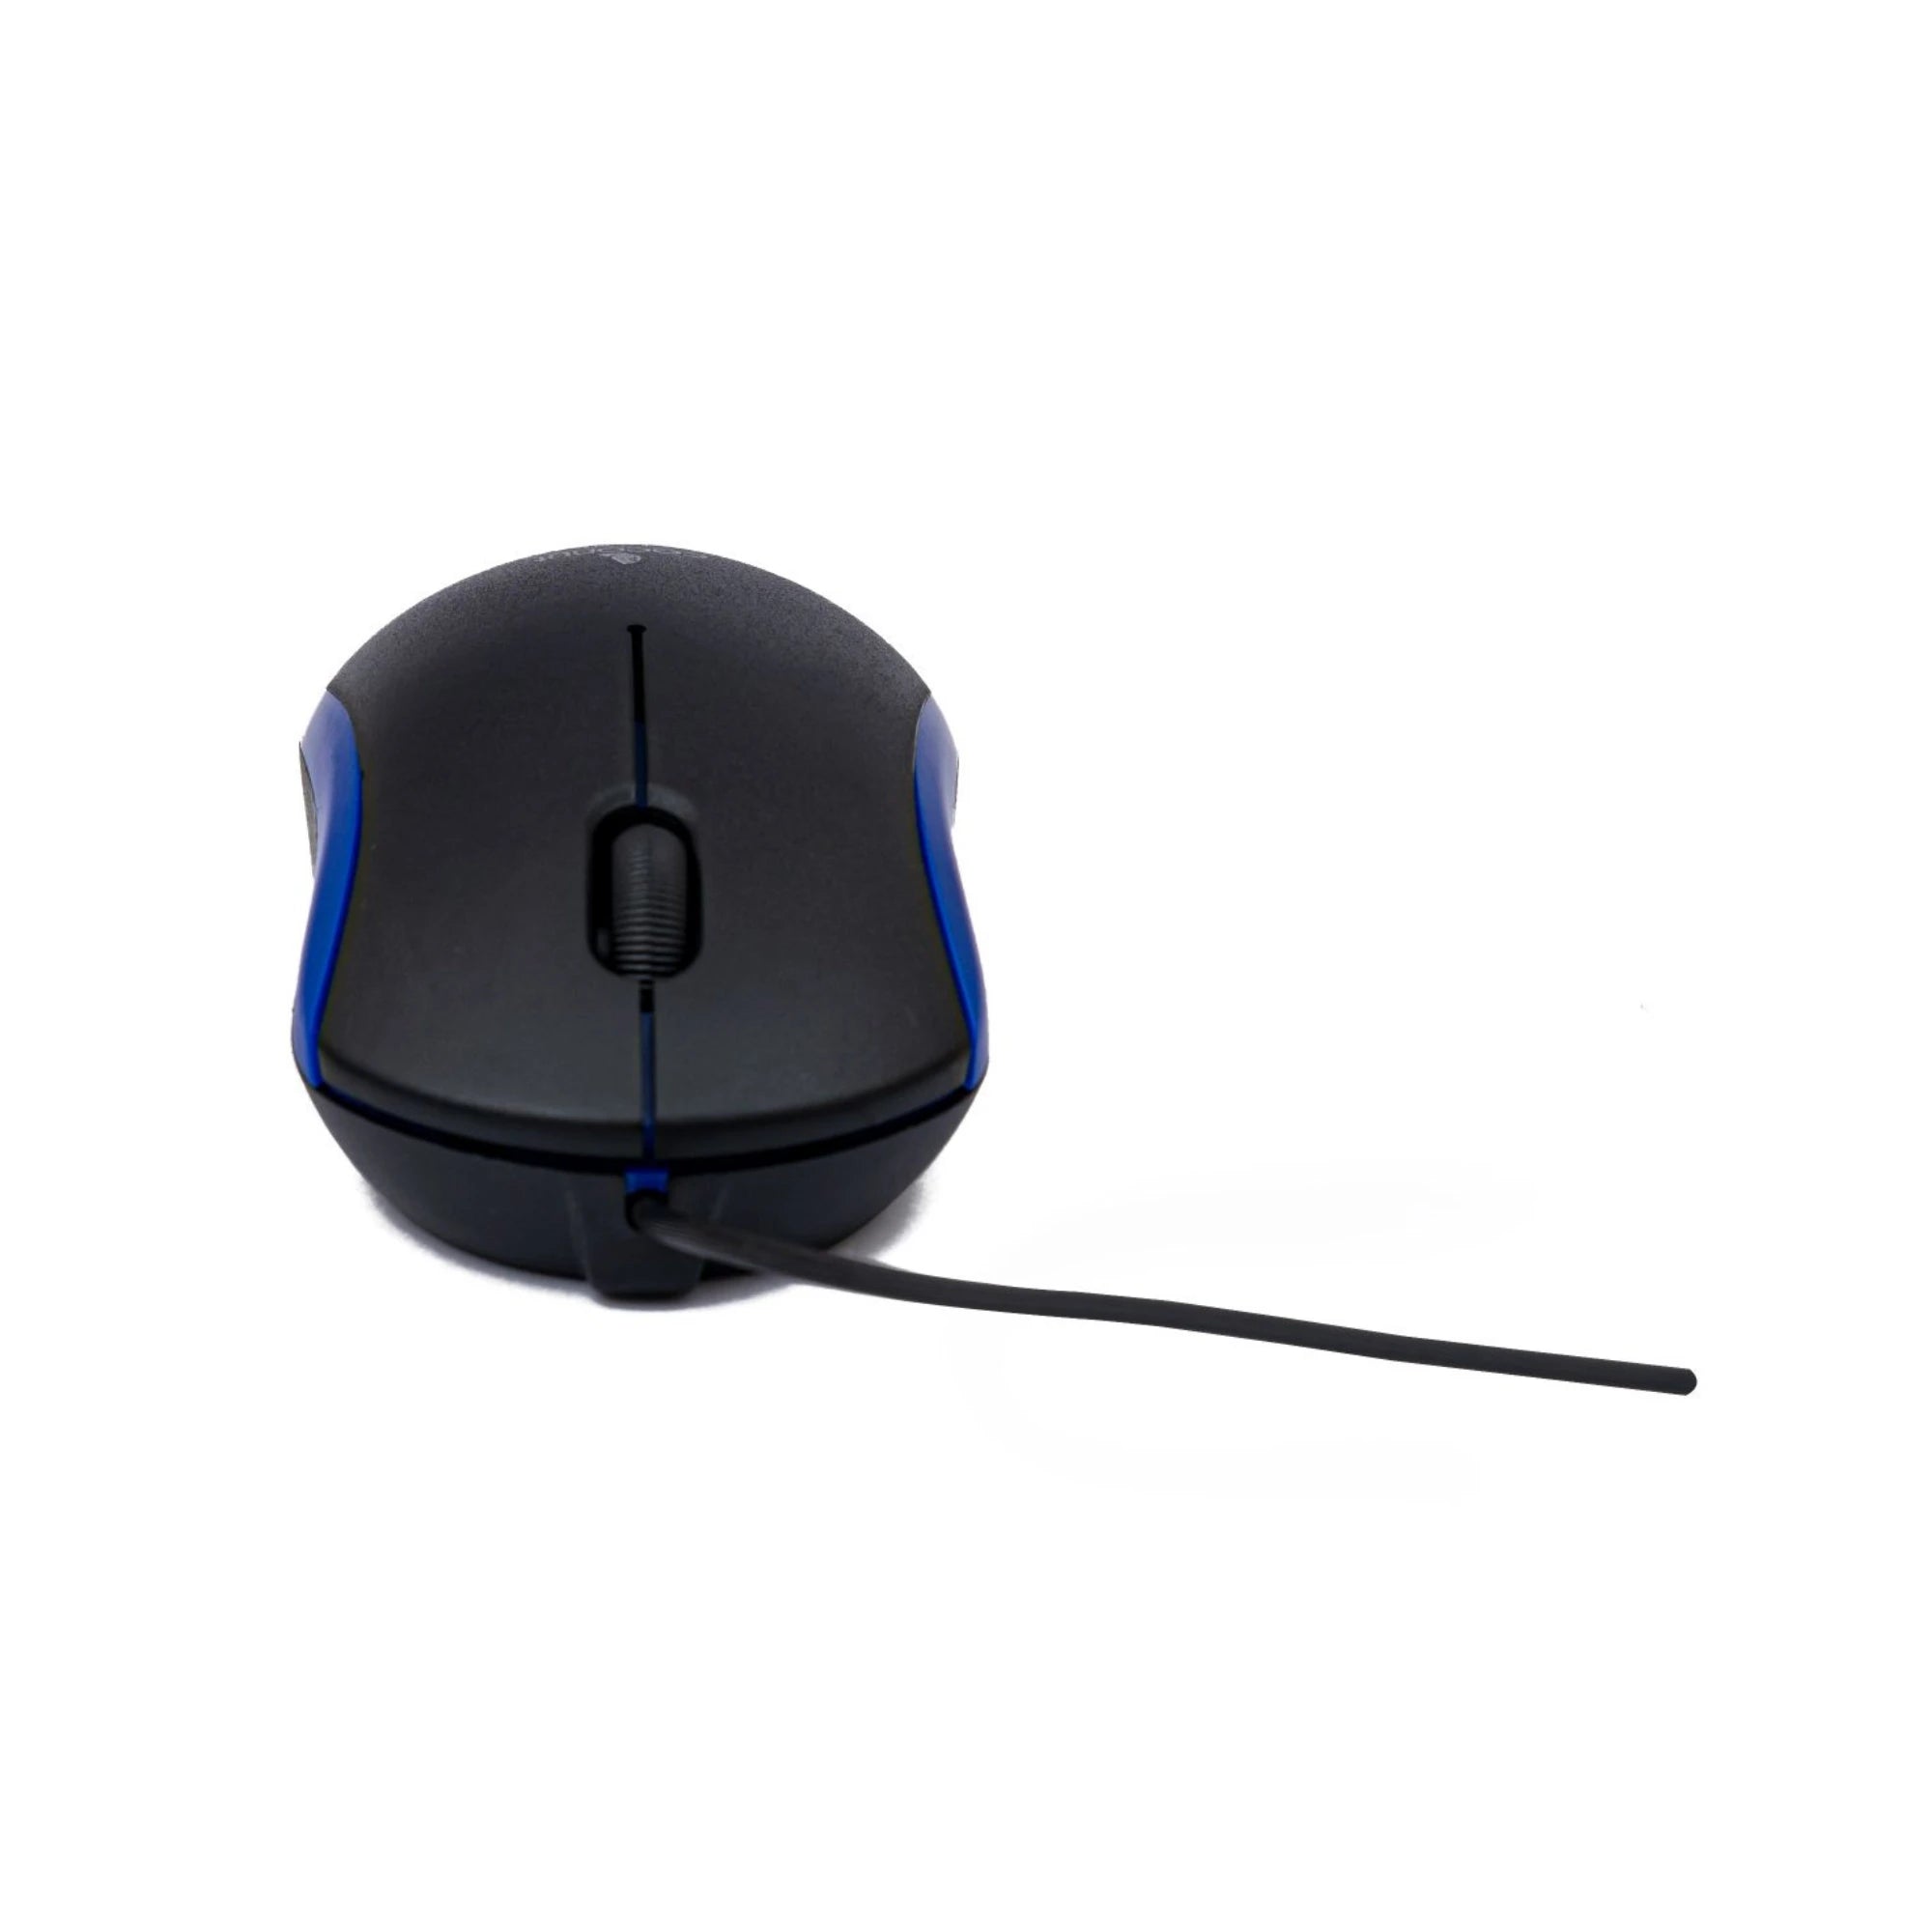 M13 Gama USB Wired Mouse